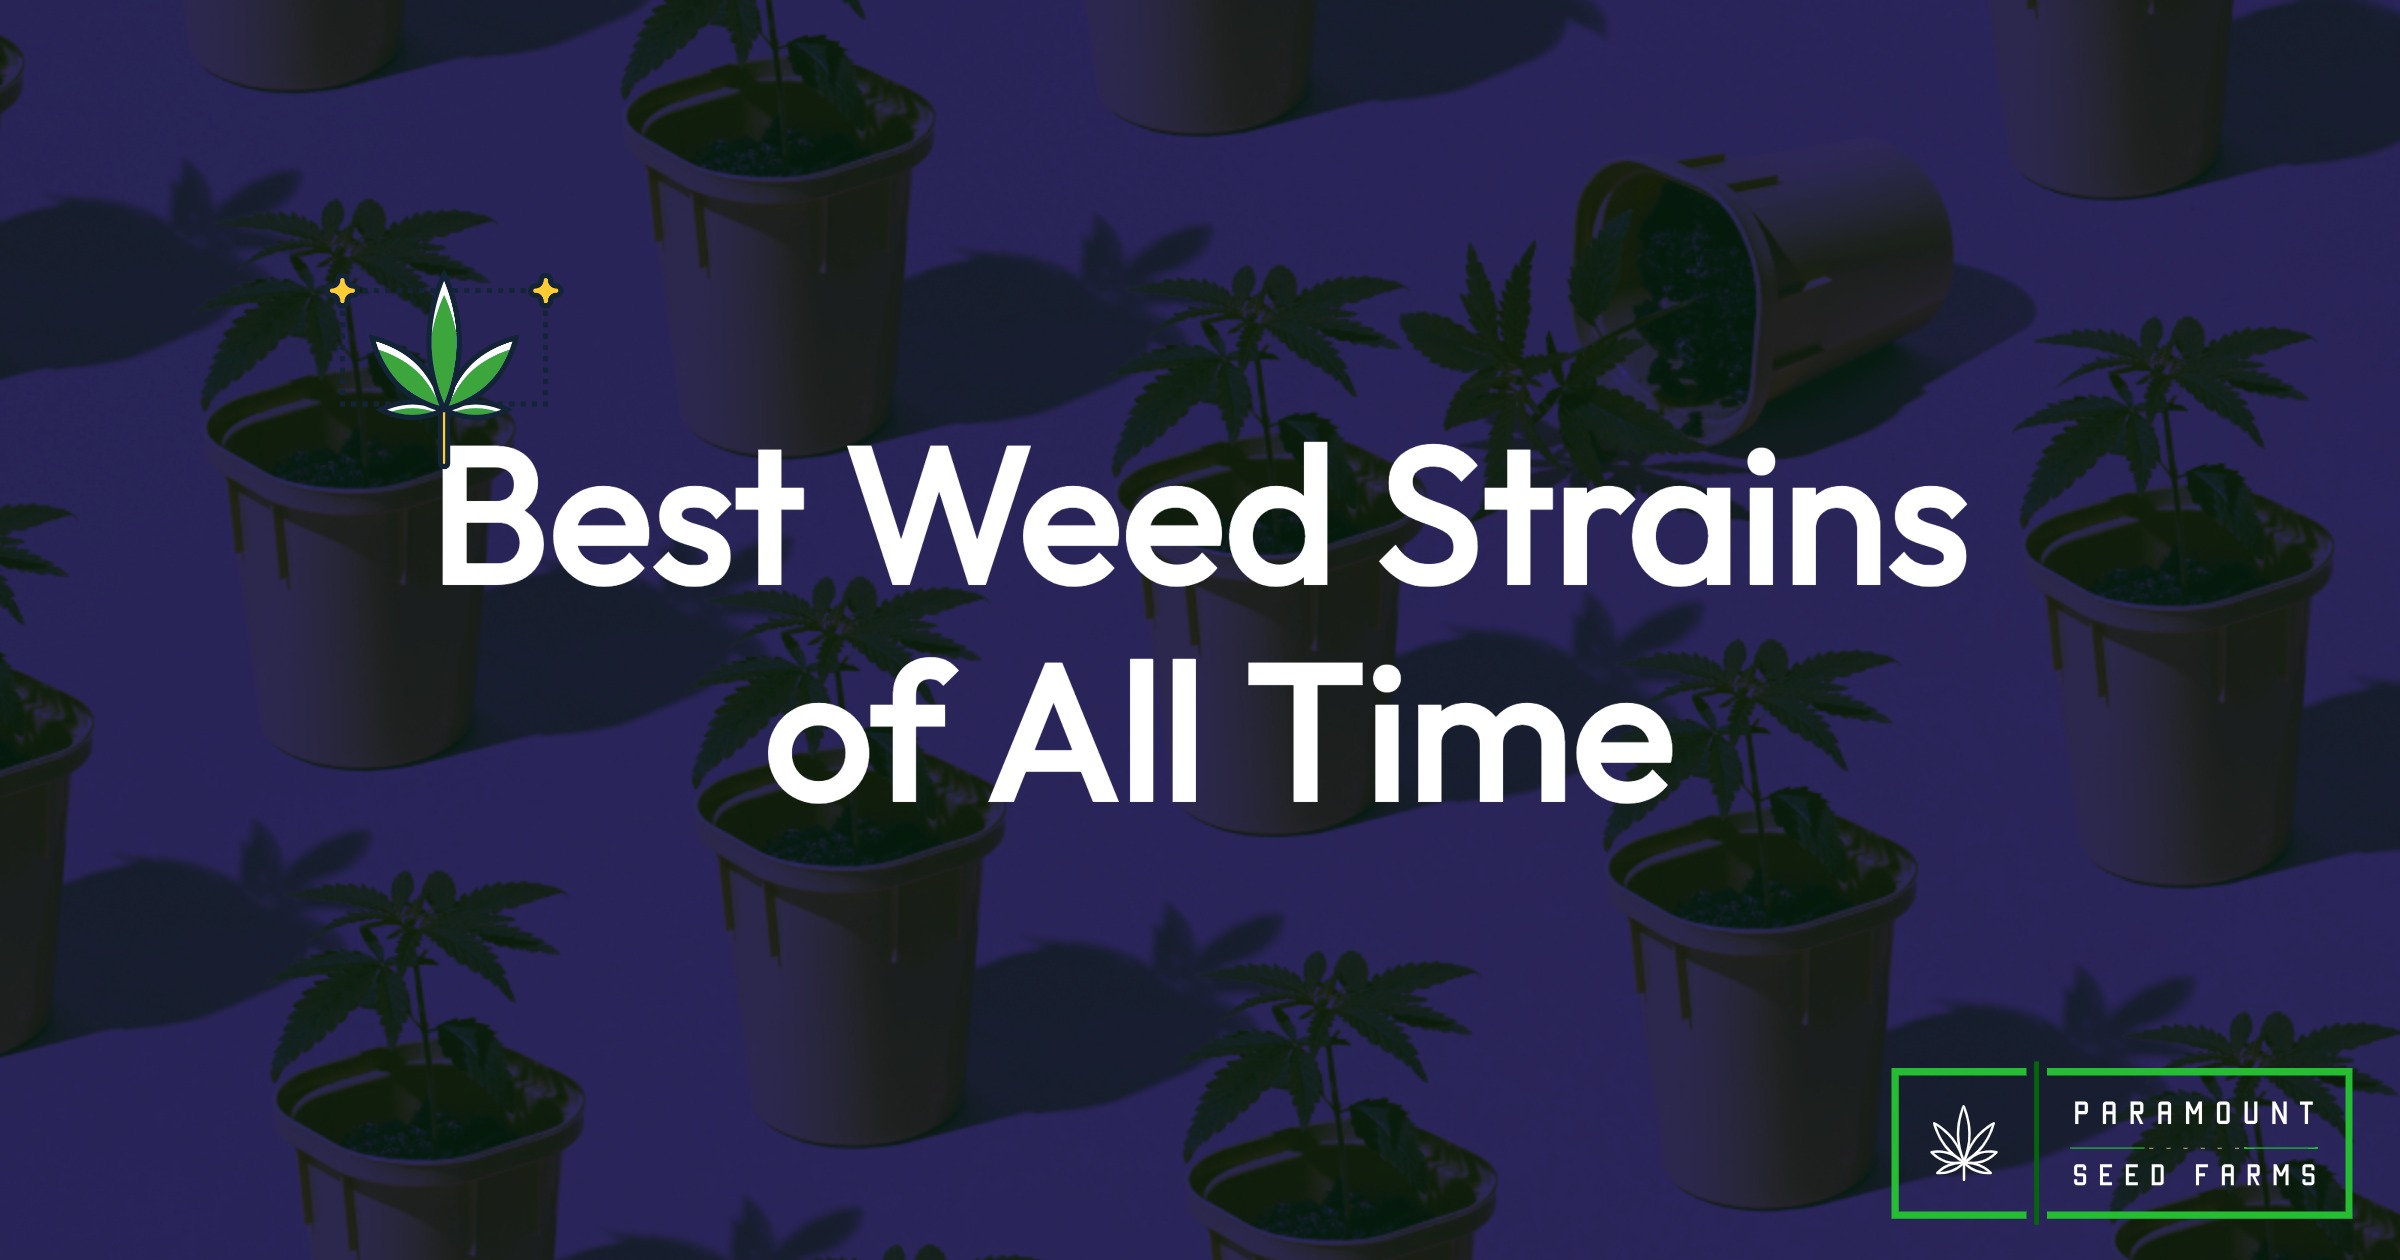 115 Best Weed Strains of All Time